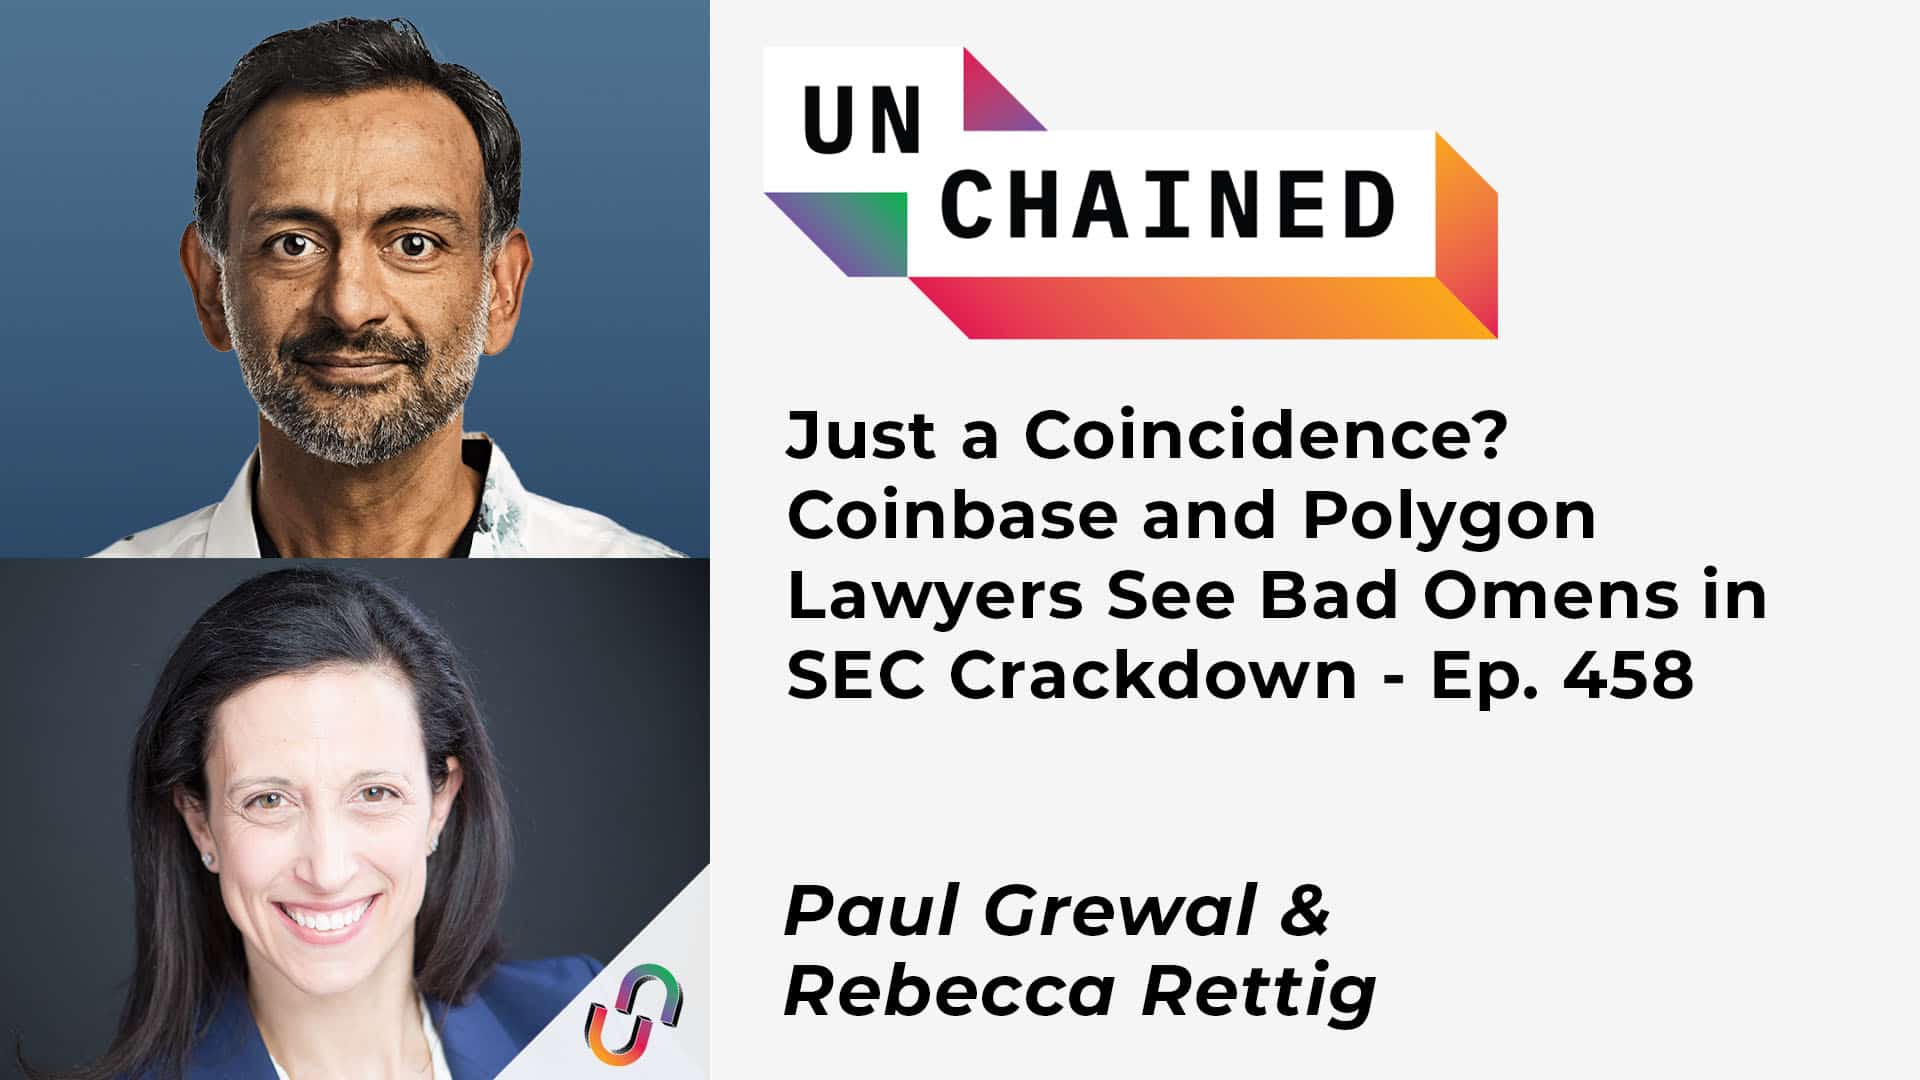 Just a Coincidence? Coinbase and Polygon Lawyers See Bad Omens in SEC Crackdown - Ep. 458